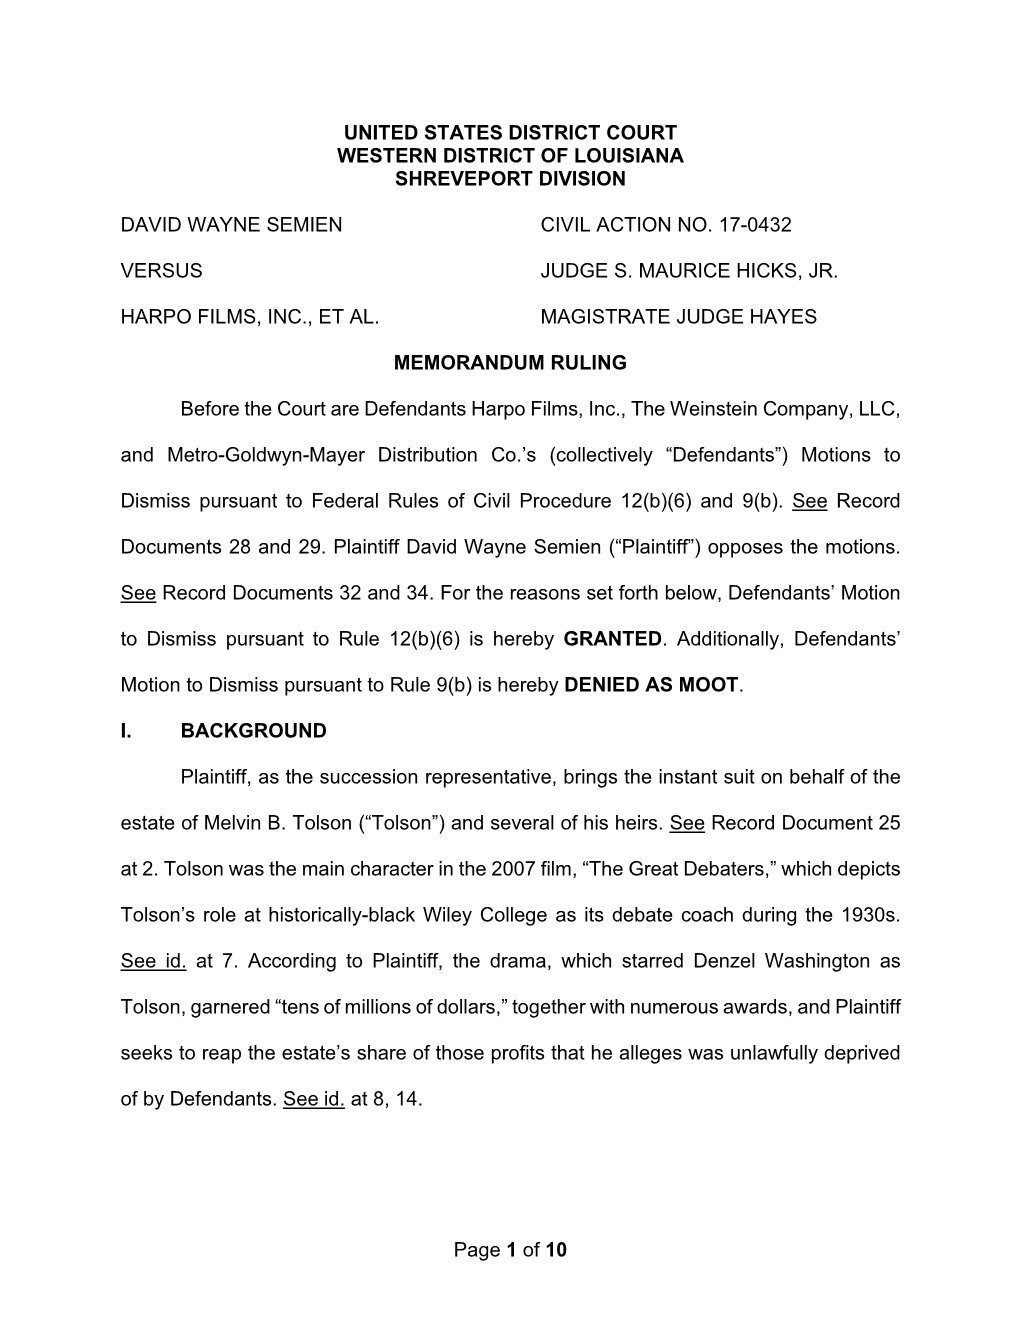 Page 1 of 10 UNITED STATES DISTRICT COURT WESTERN DISTRICT of LOUISIANA SHREVEPORT DIVISION DAVID WAYNE SEMIEN CIVIL ACTION